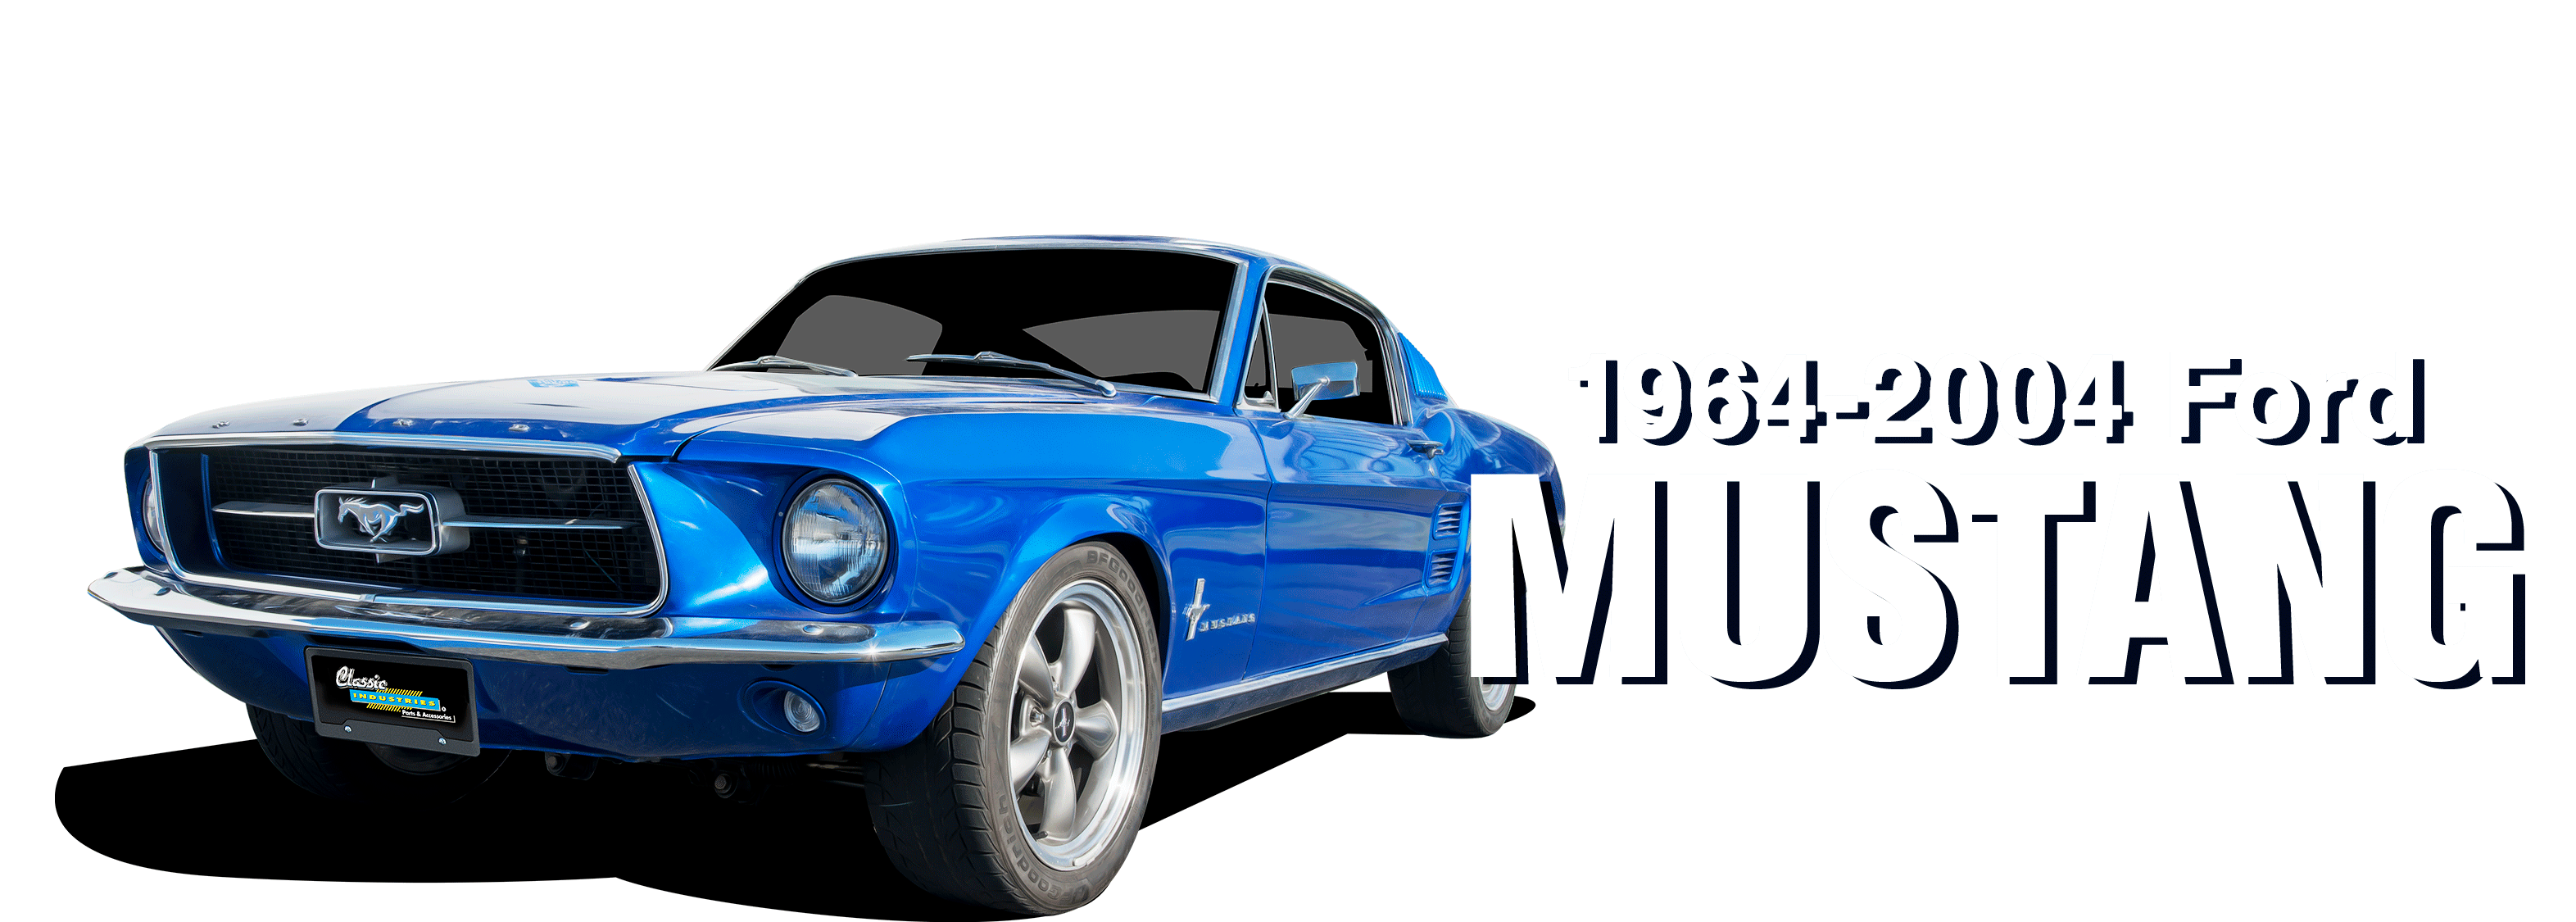 1964-2004 Ford Mustang